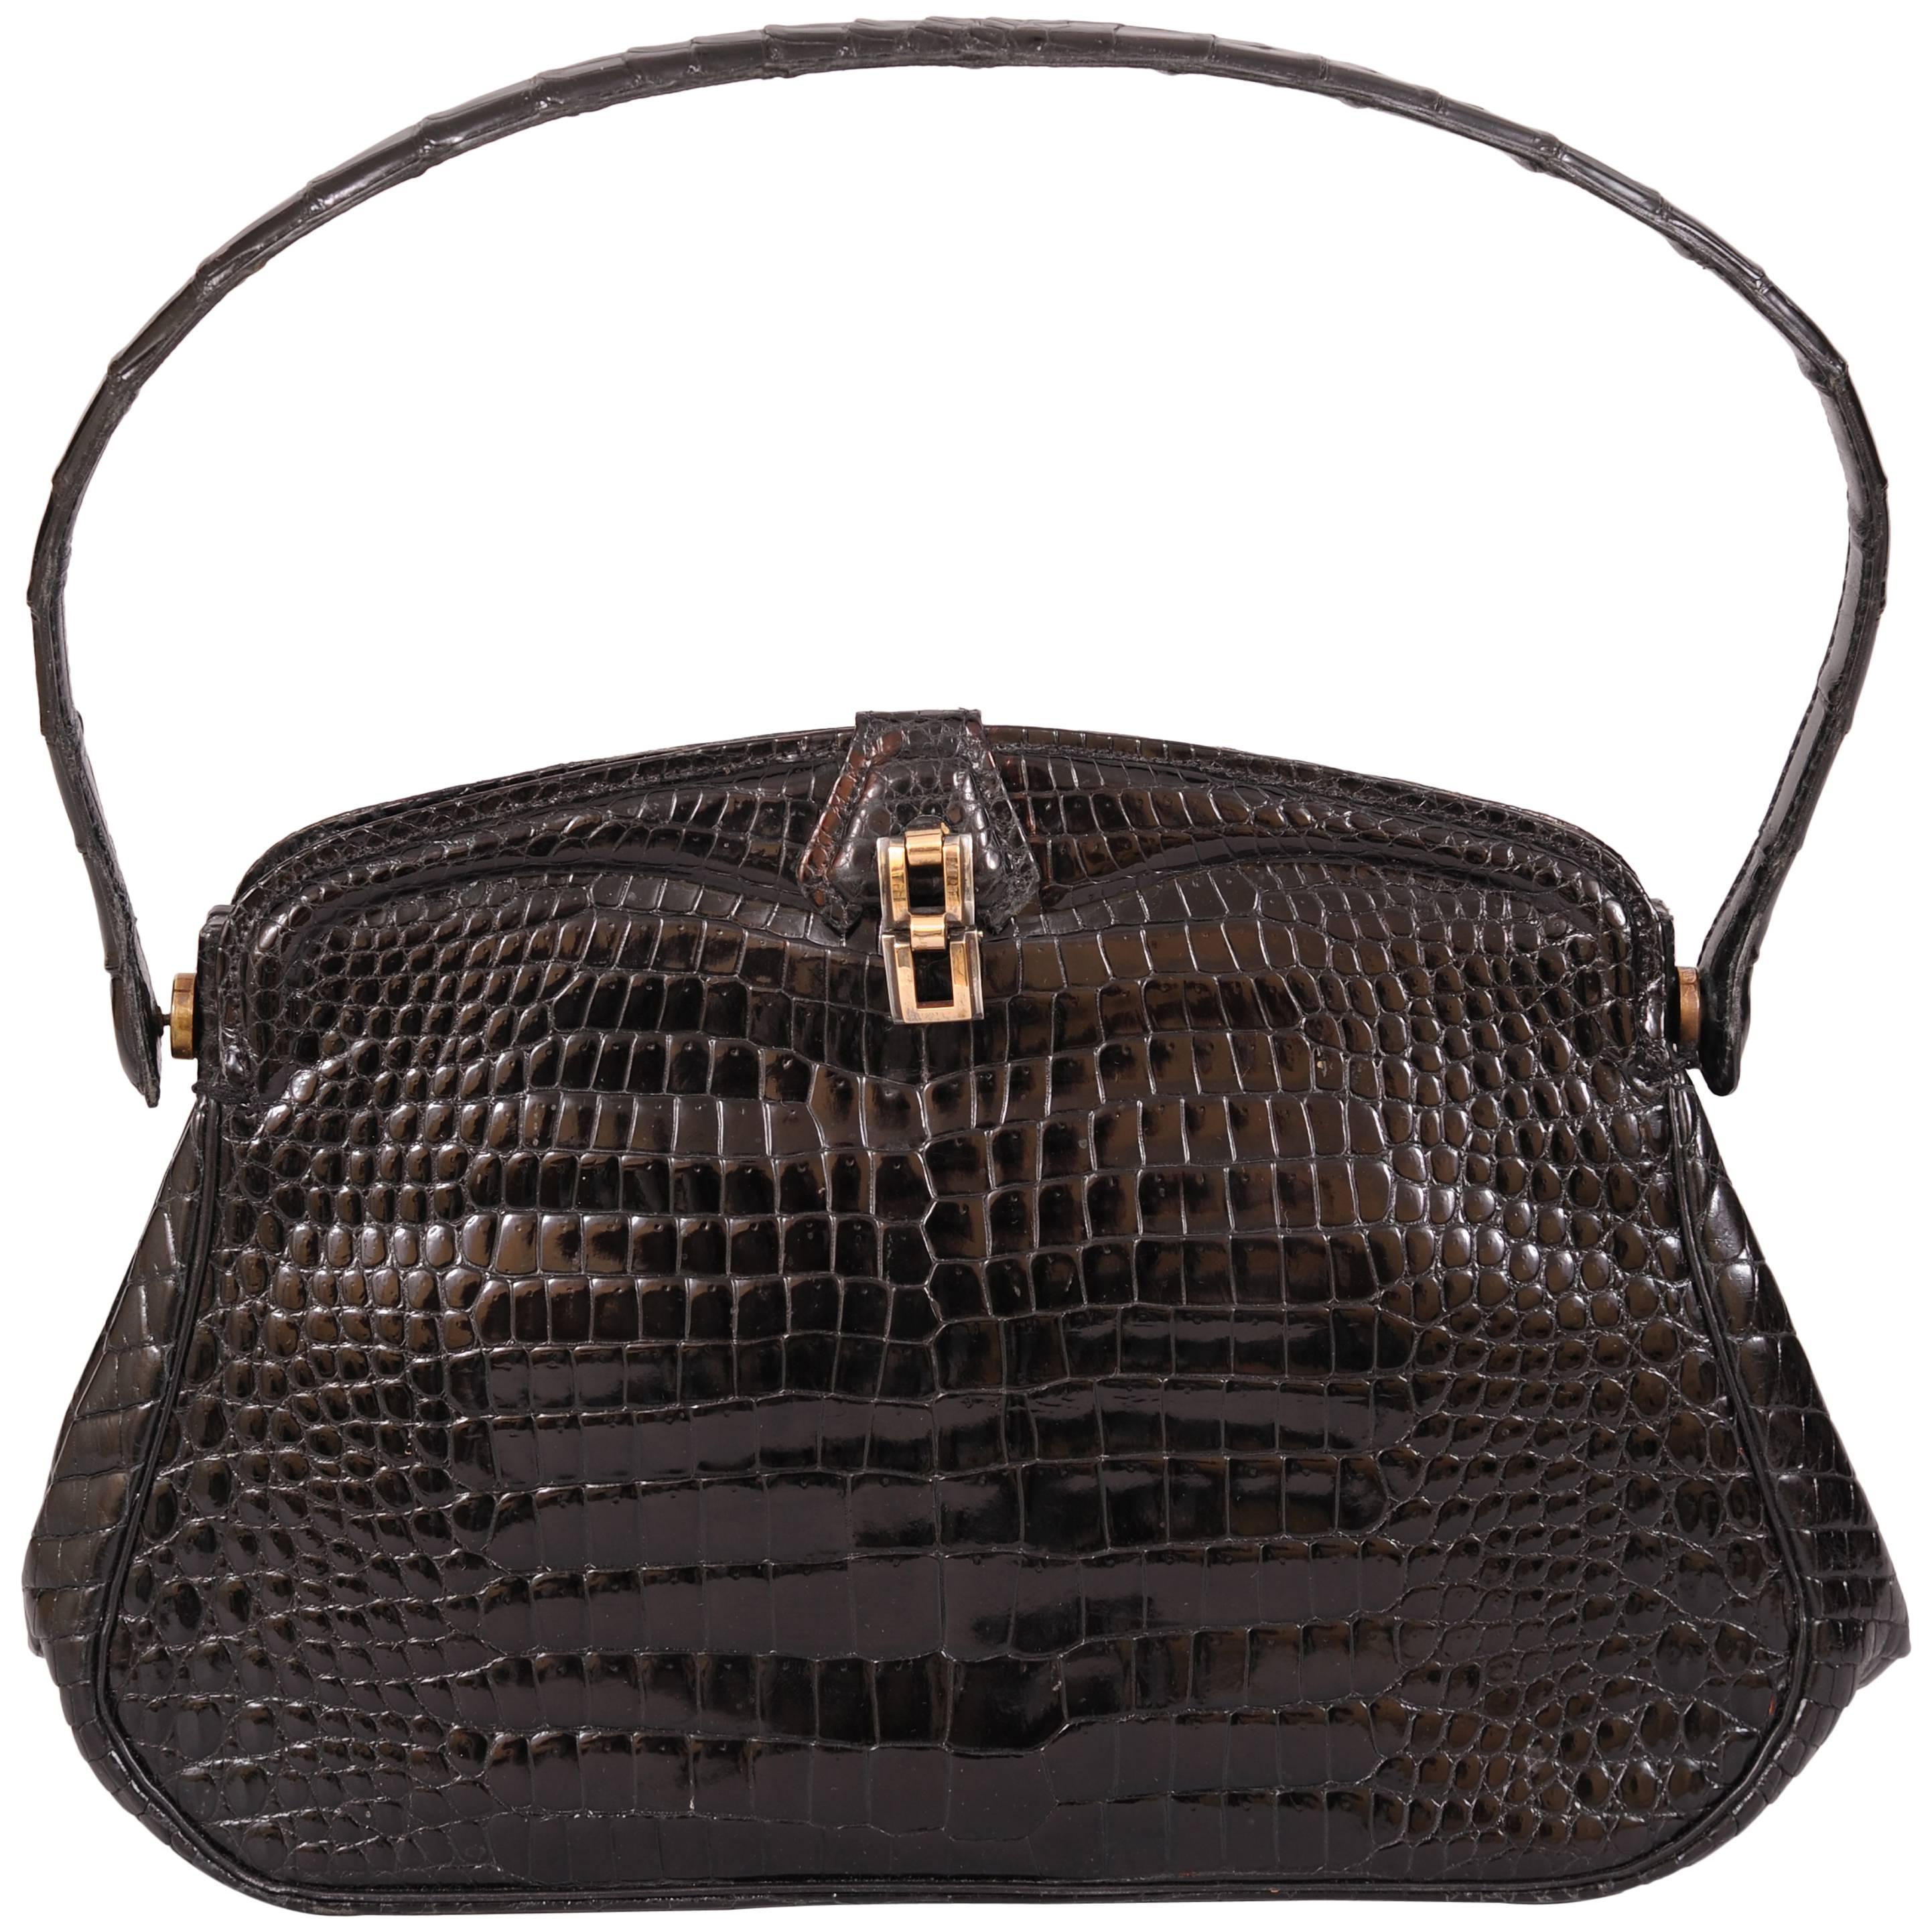 Chic Black Crocodile Evening Bag Hallmarked Sterling and Gold Clasp For Sale